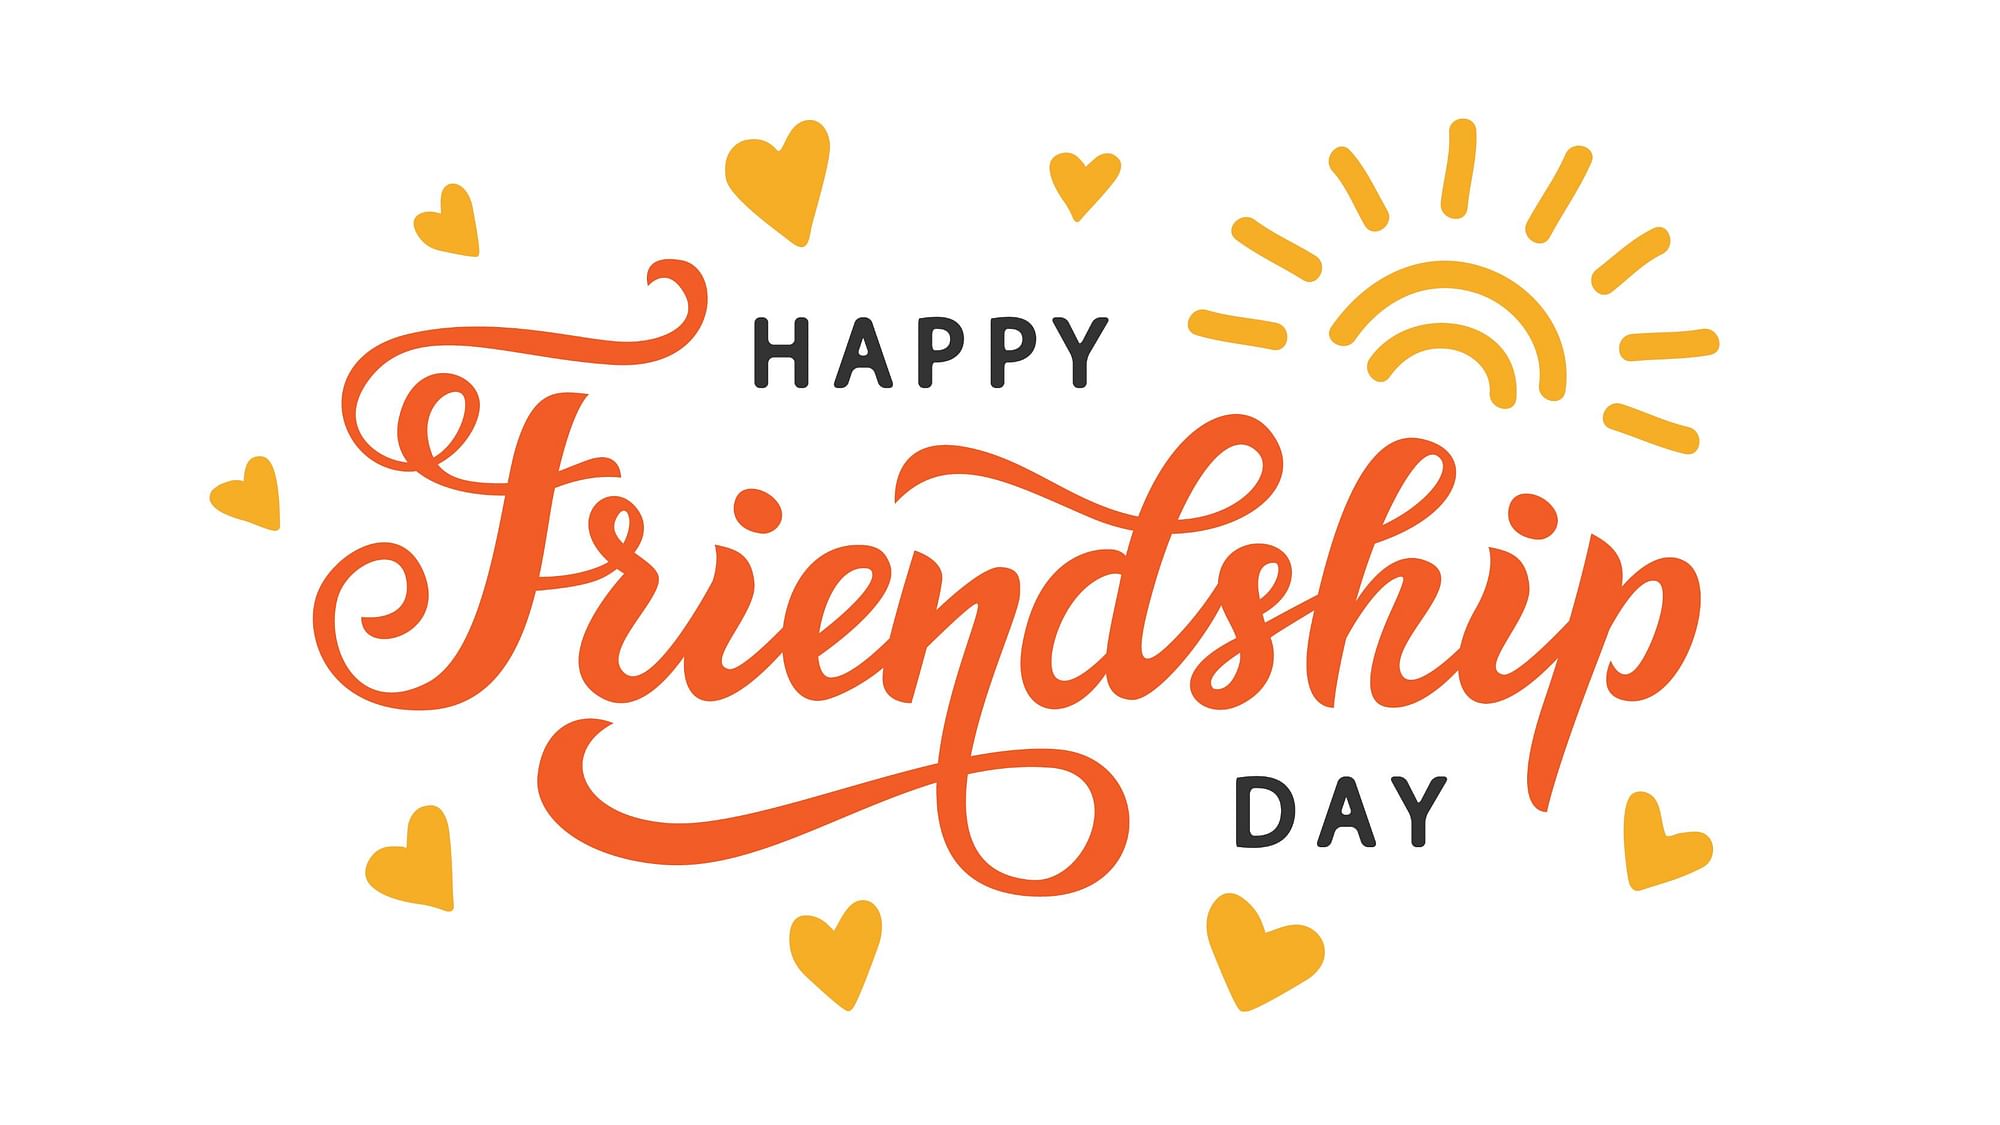 Happy International Friendship Day 2022 Wishes, Quotes, Greetings, Images, Status for WhatsApp, Facebook, Instagram. Friendship Day Messages, SMS. HD Wallpapers